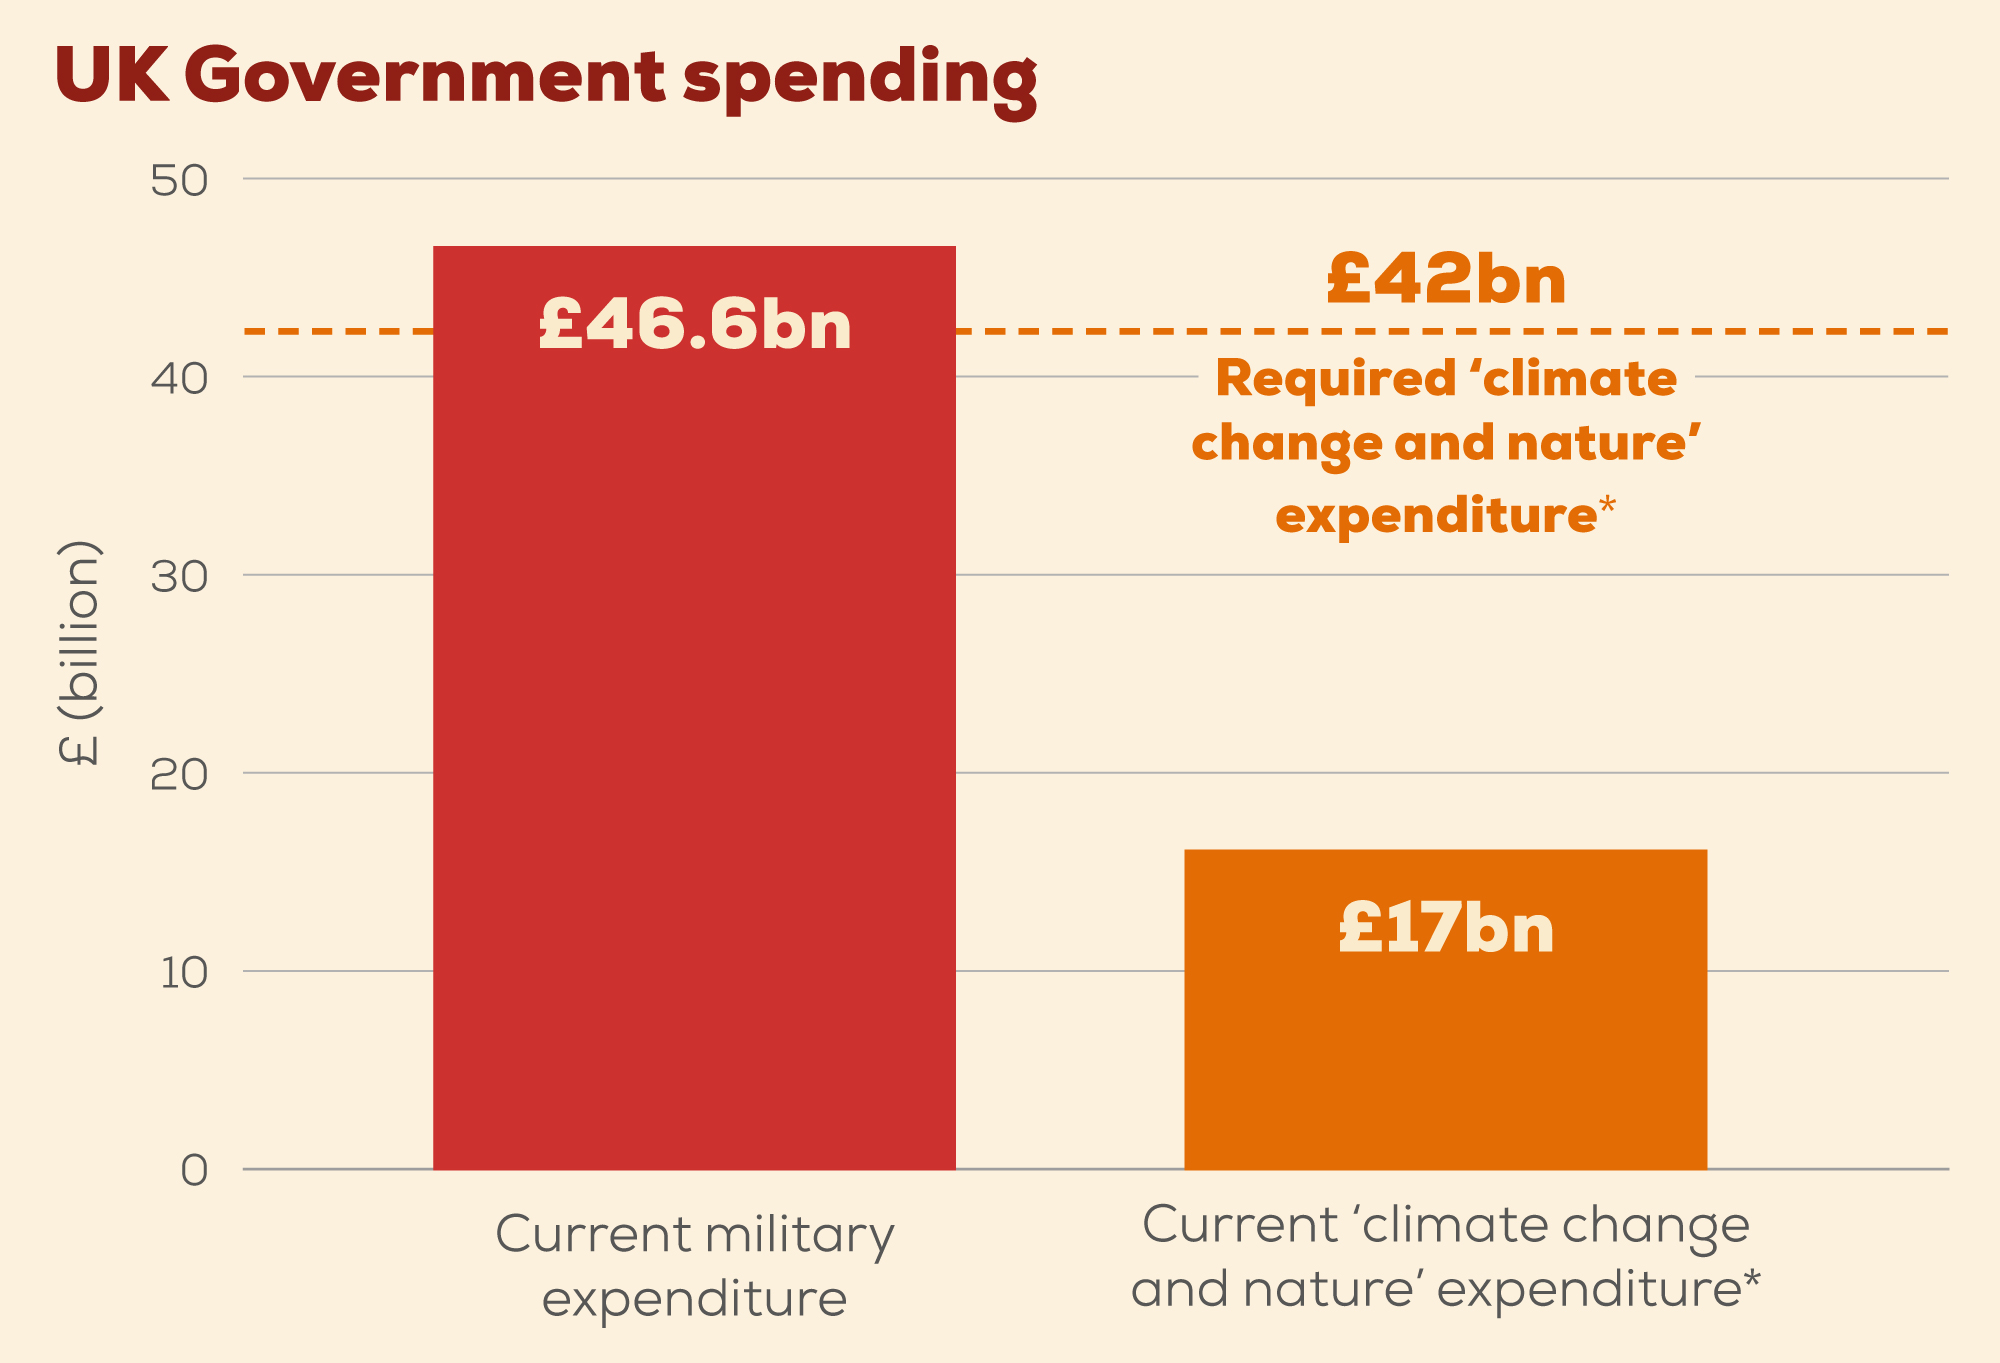 A vertical bar chart with two columns comparing UK government military expenditure with that on &#039;climate change and nature&#039;